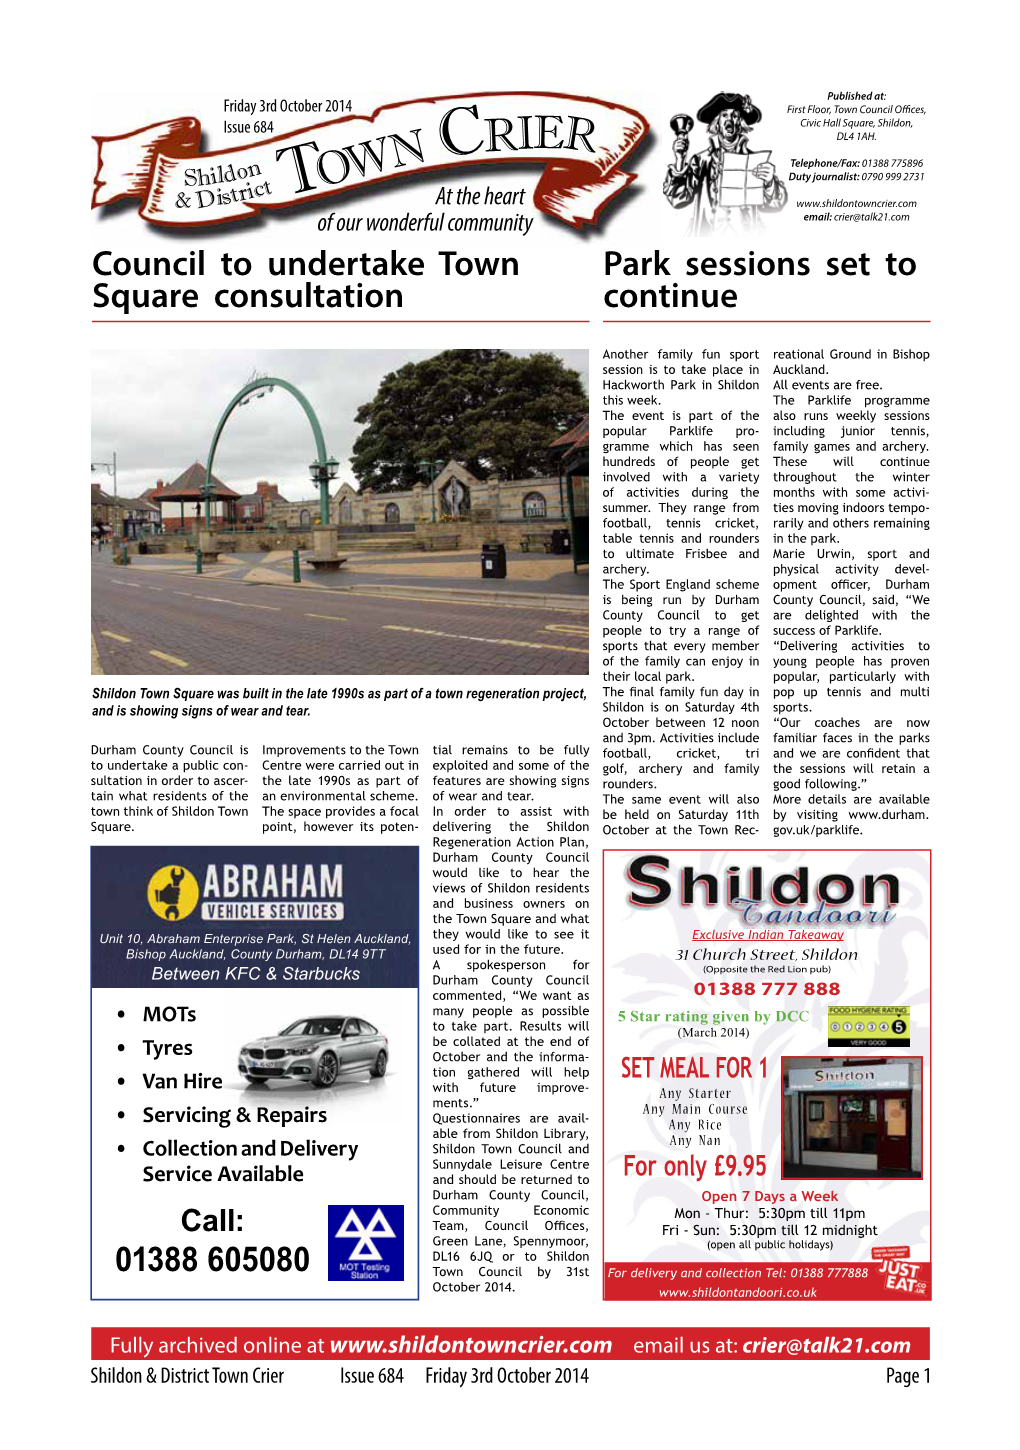 Town Crier Issue 684 Friday 3Rd October 2014 Page 1 N Crier Shildon Ow Classifieds Istri C T & D T All About Local People